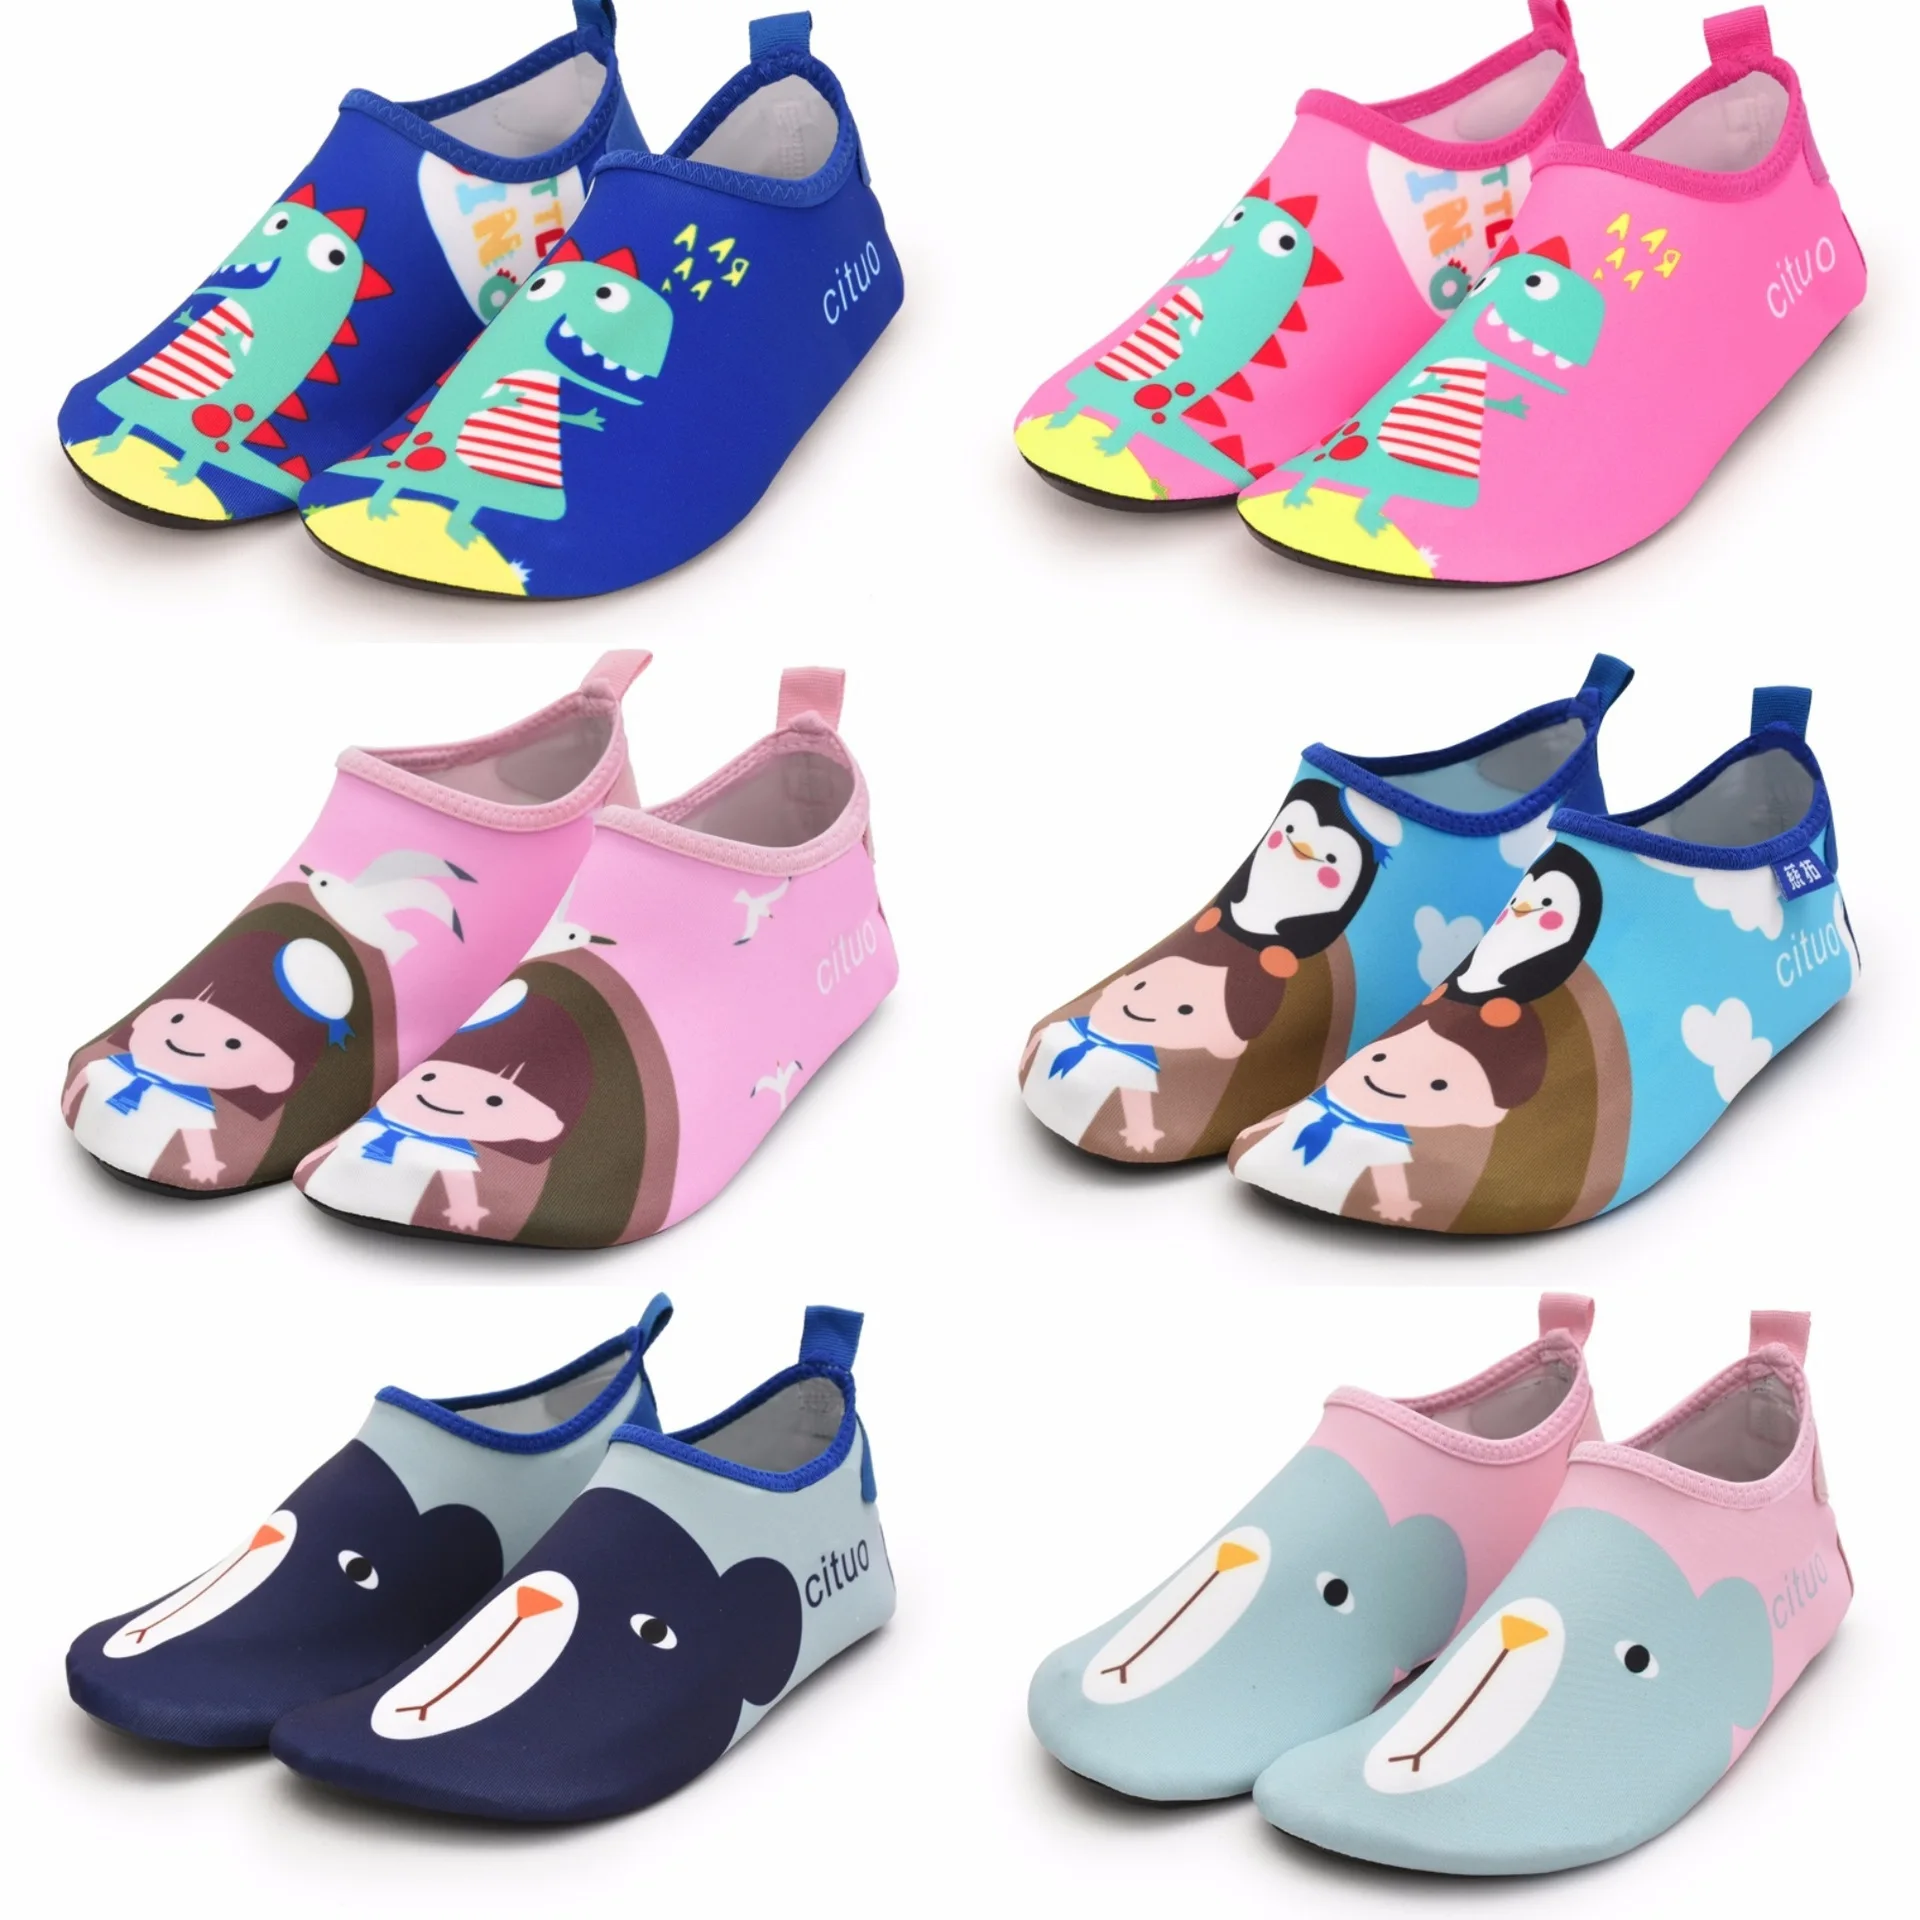 MEIDO Womens and Mens Kids Water Shoes Quick Dry Non-Slip Water Skin Barefoot Sports Shoes Aqua Socks 